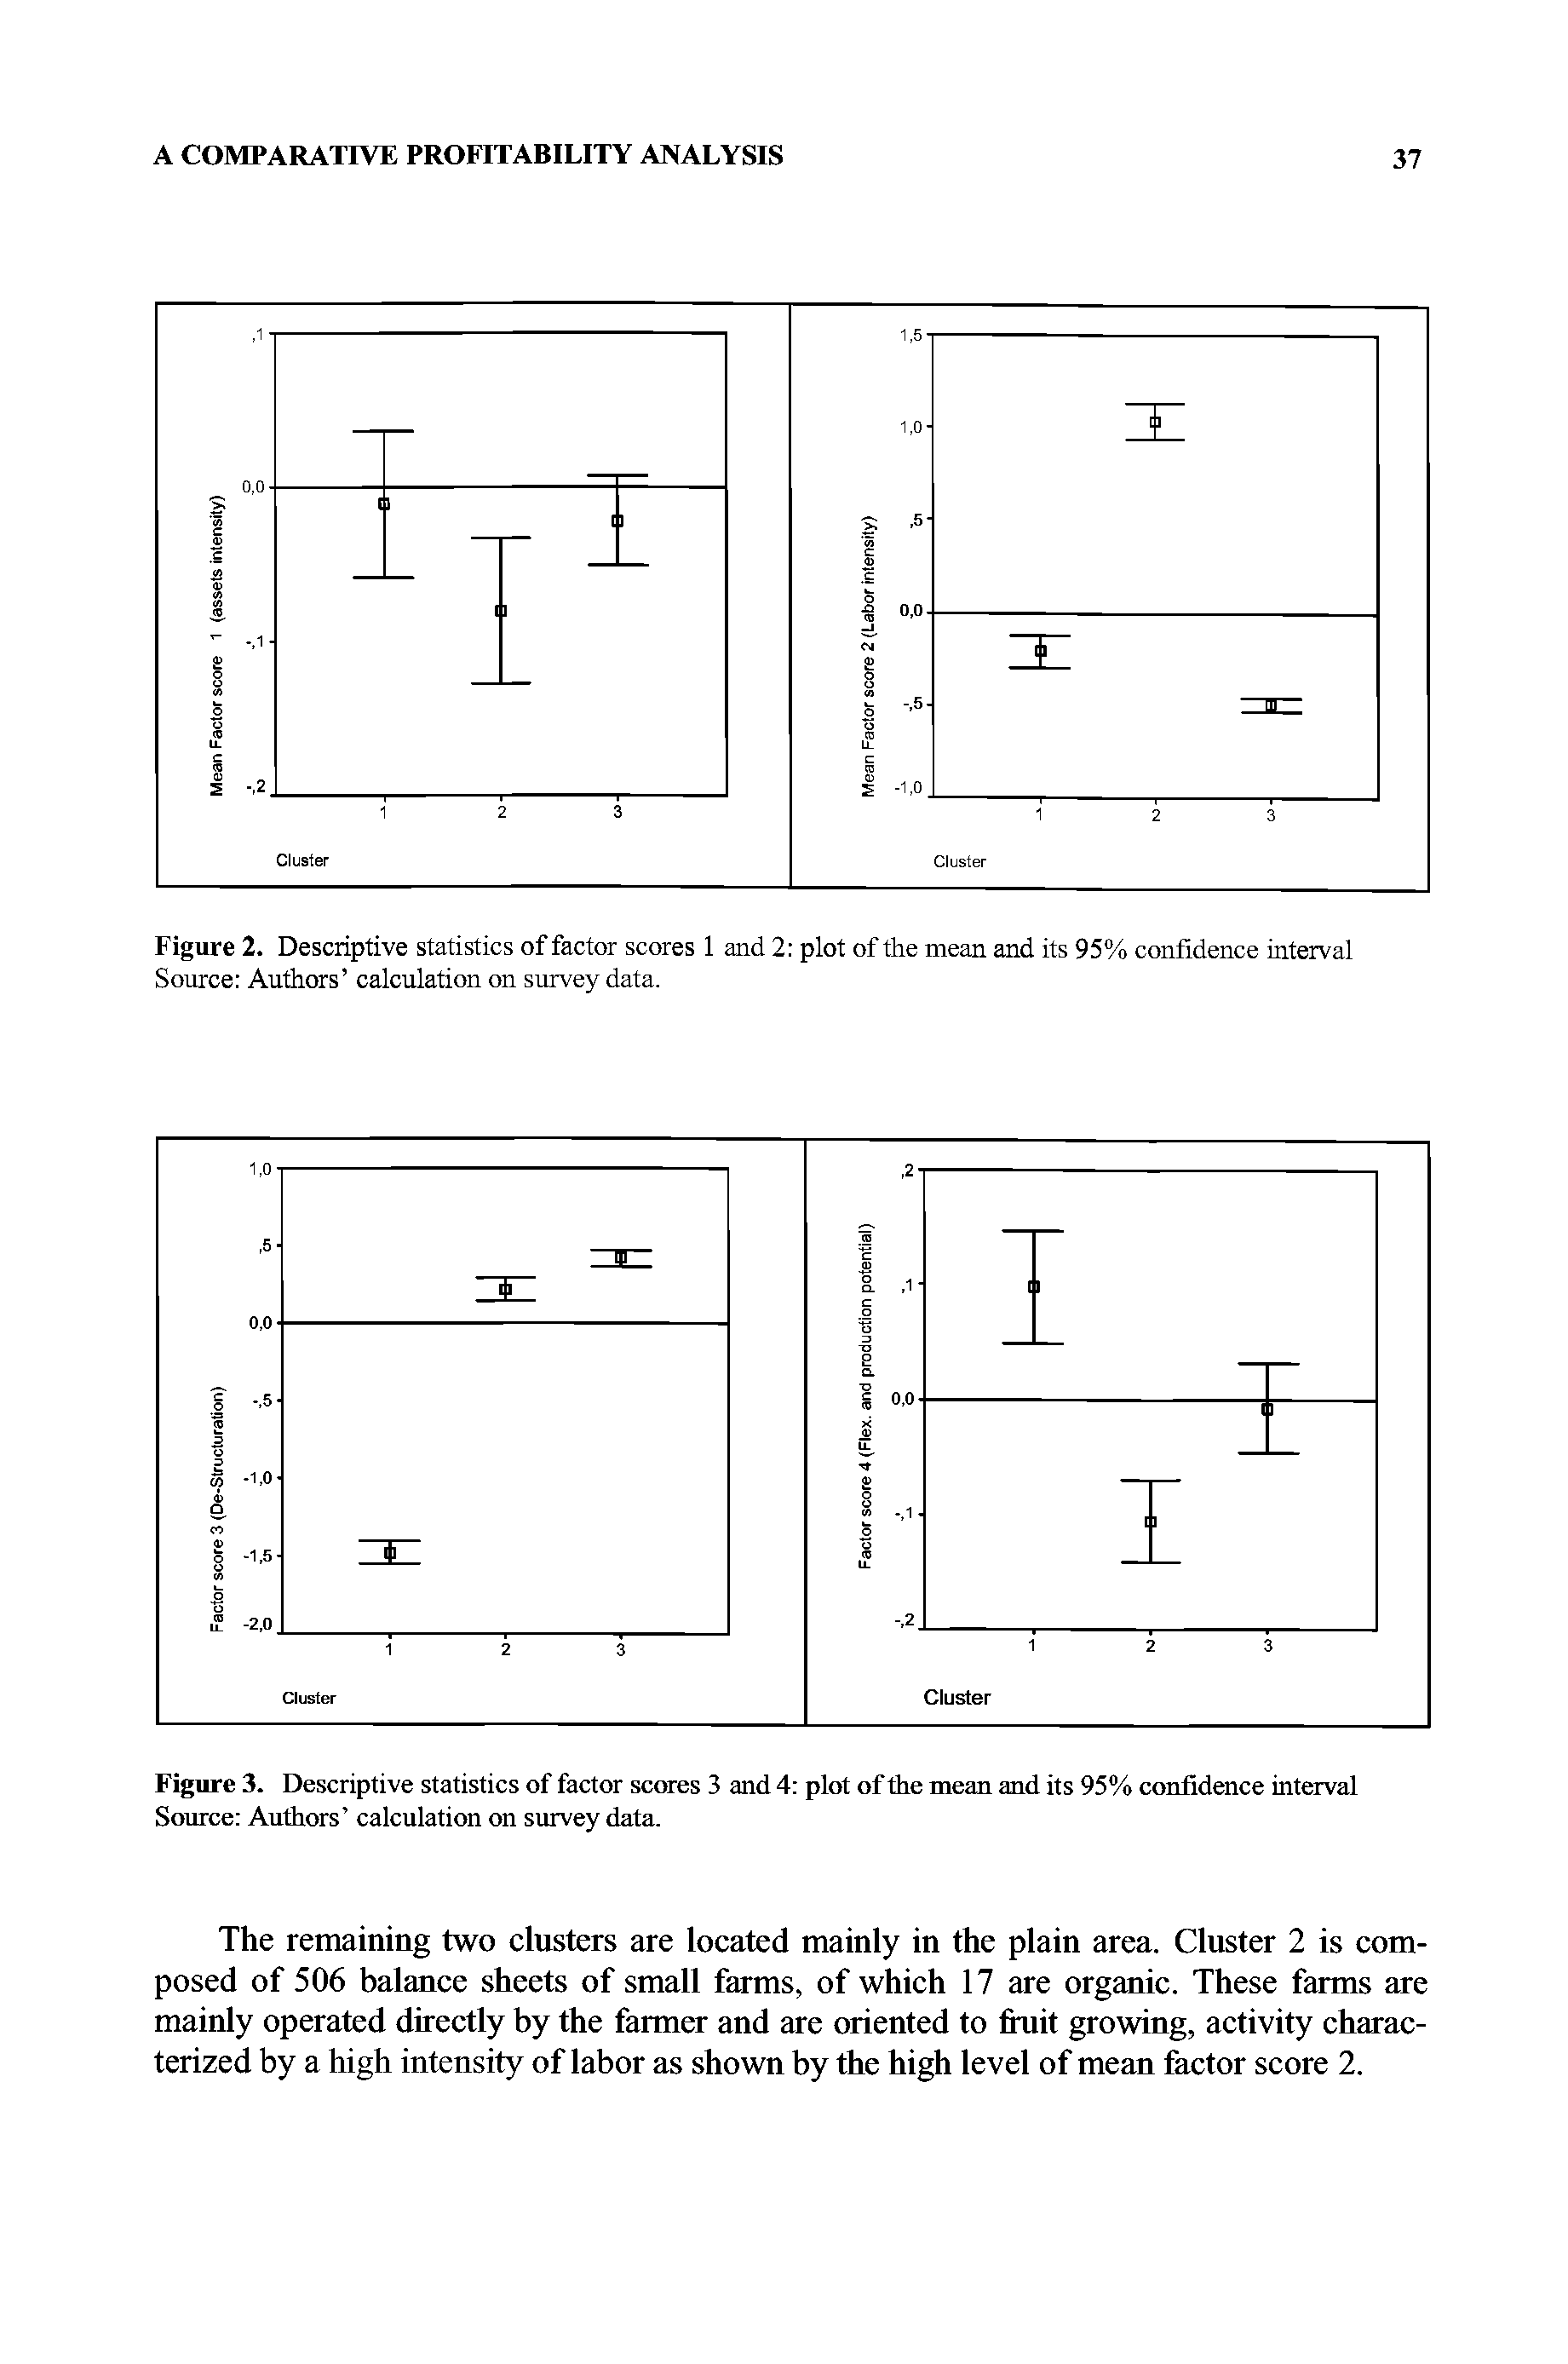 Figure 2. Descriptive statistics of factor scores 1 and 2 plot of the mean and its 95% confidence interval Source Authors calculation on survey data.